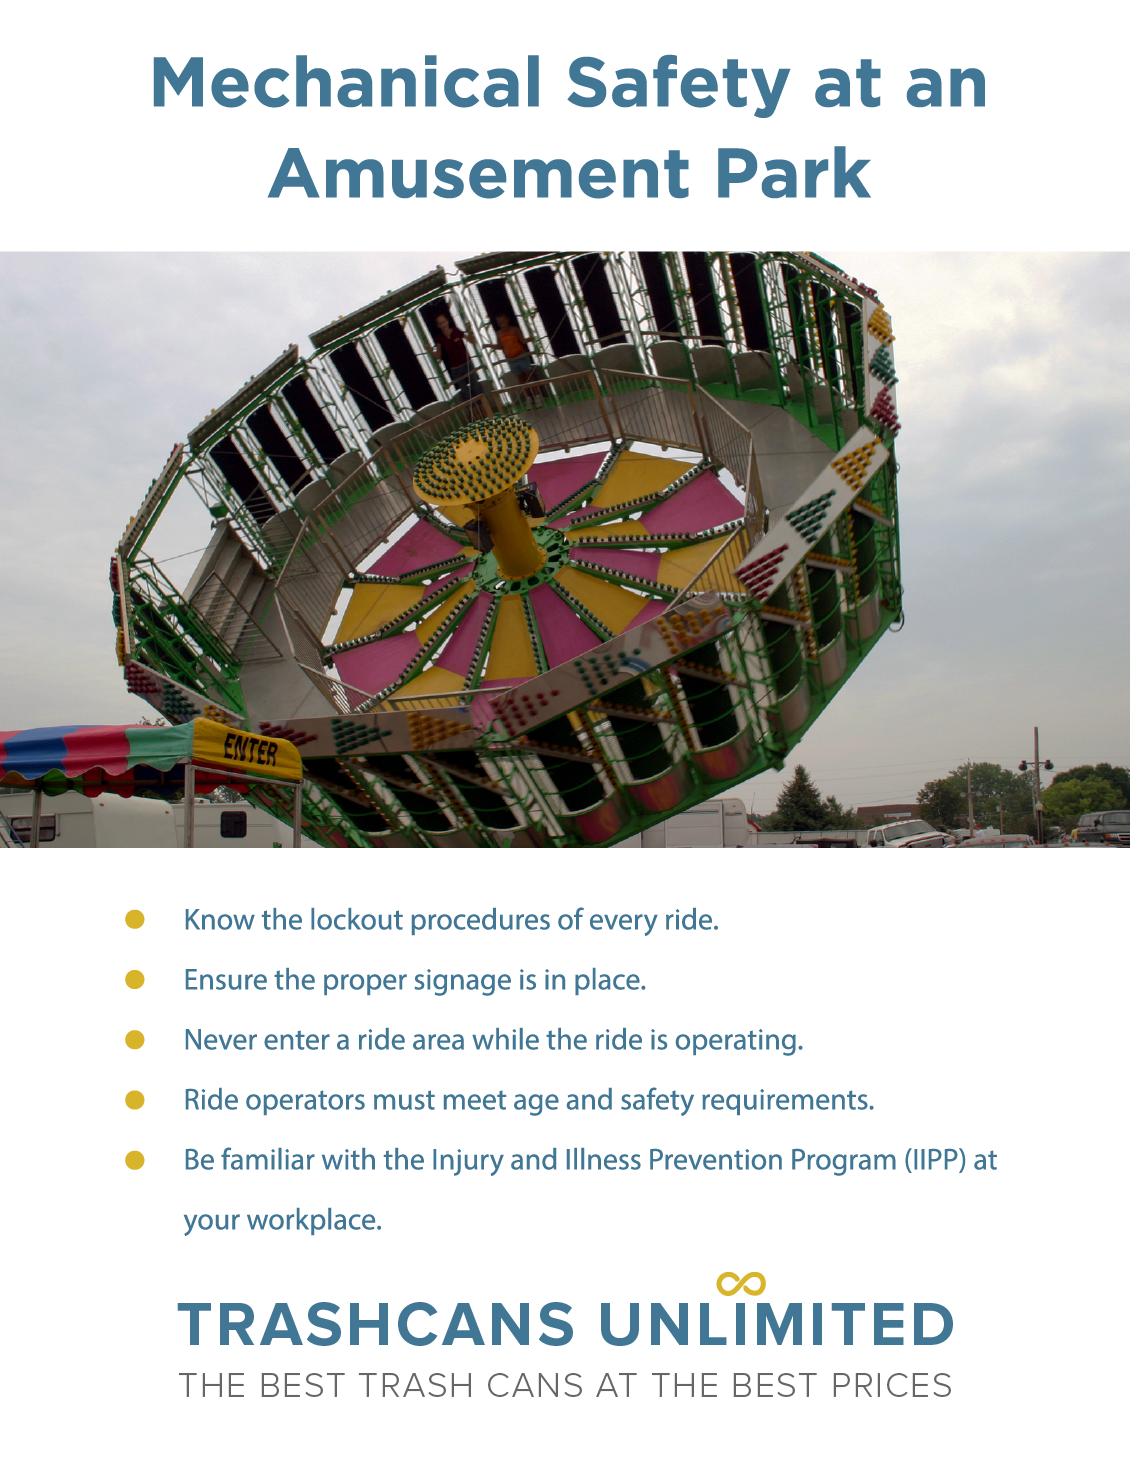 Brief all employees on the necessary mechanical safety procedures for your amusement park rides. 